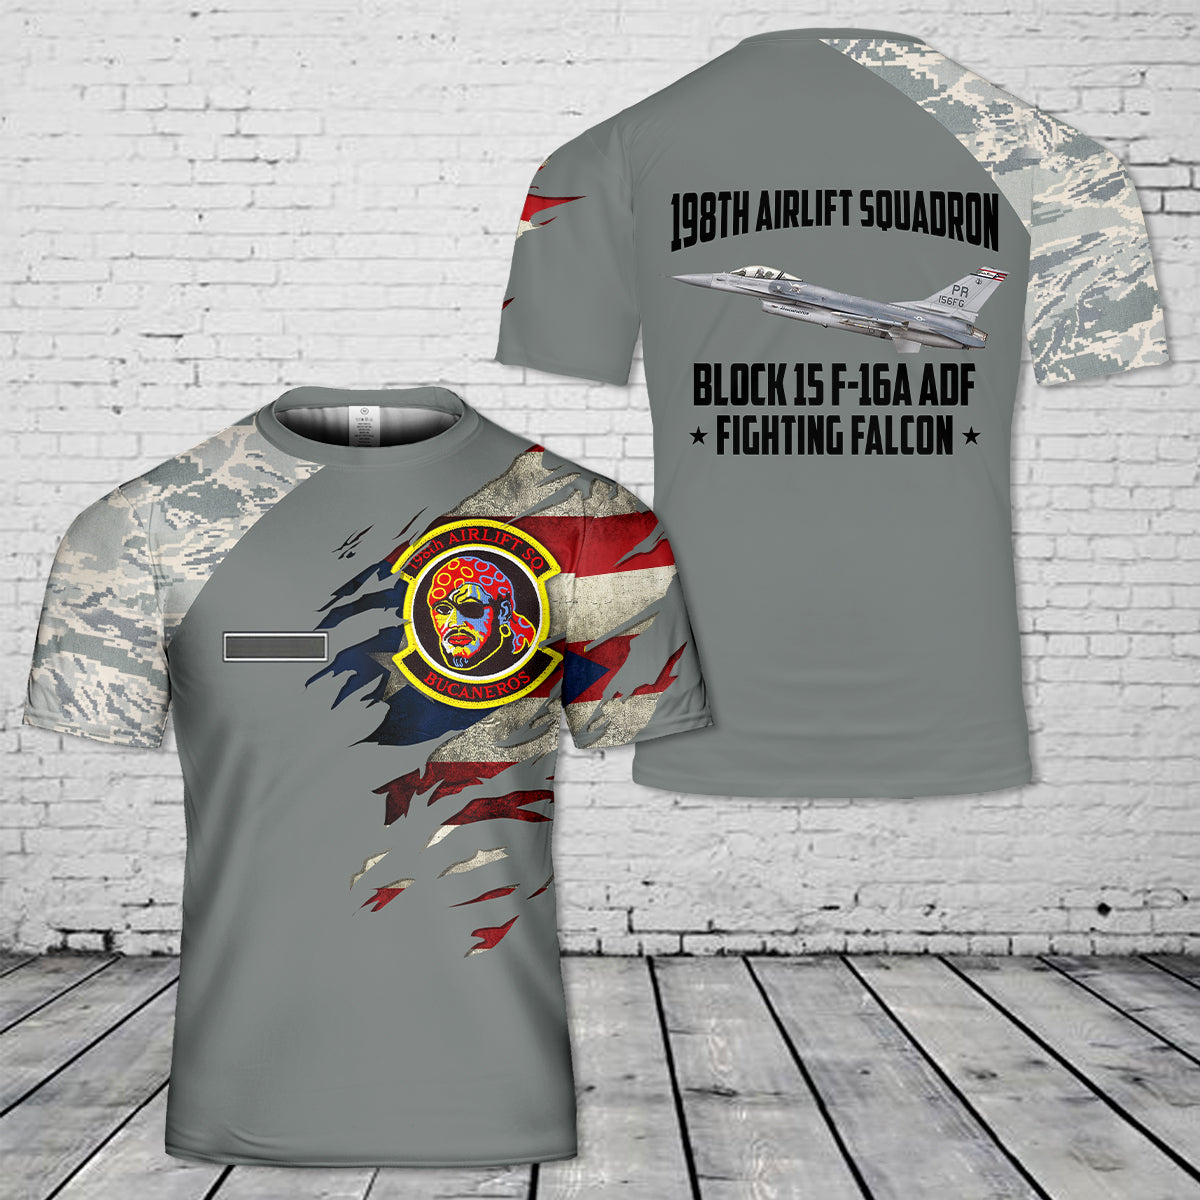 Custom Name Puerto Rico Air National Guard 198th Airlift Squadron Bucaneros Block 15 F-16A ADF Fighting Falcon T-Shirt 3D